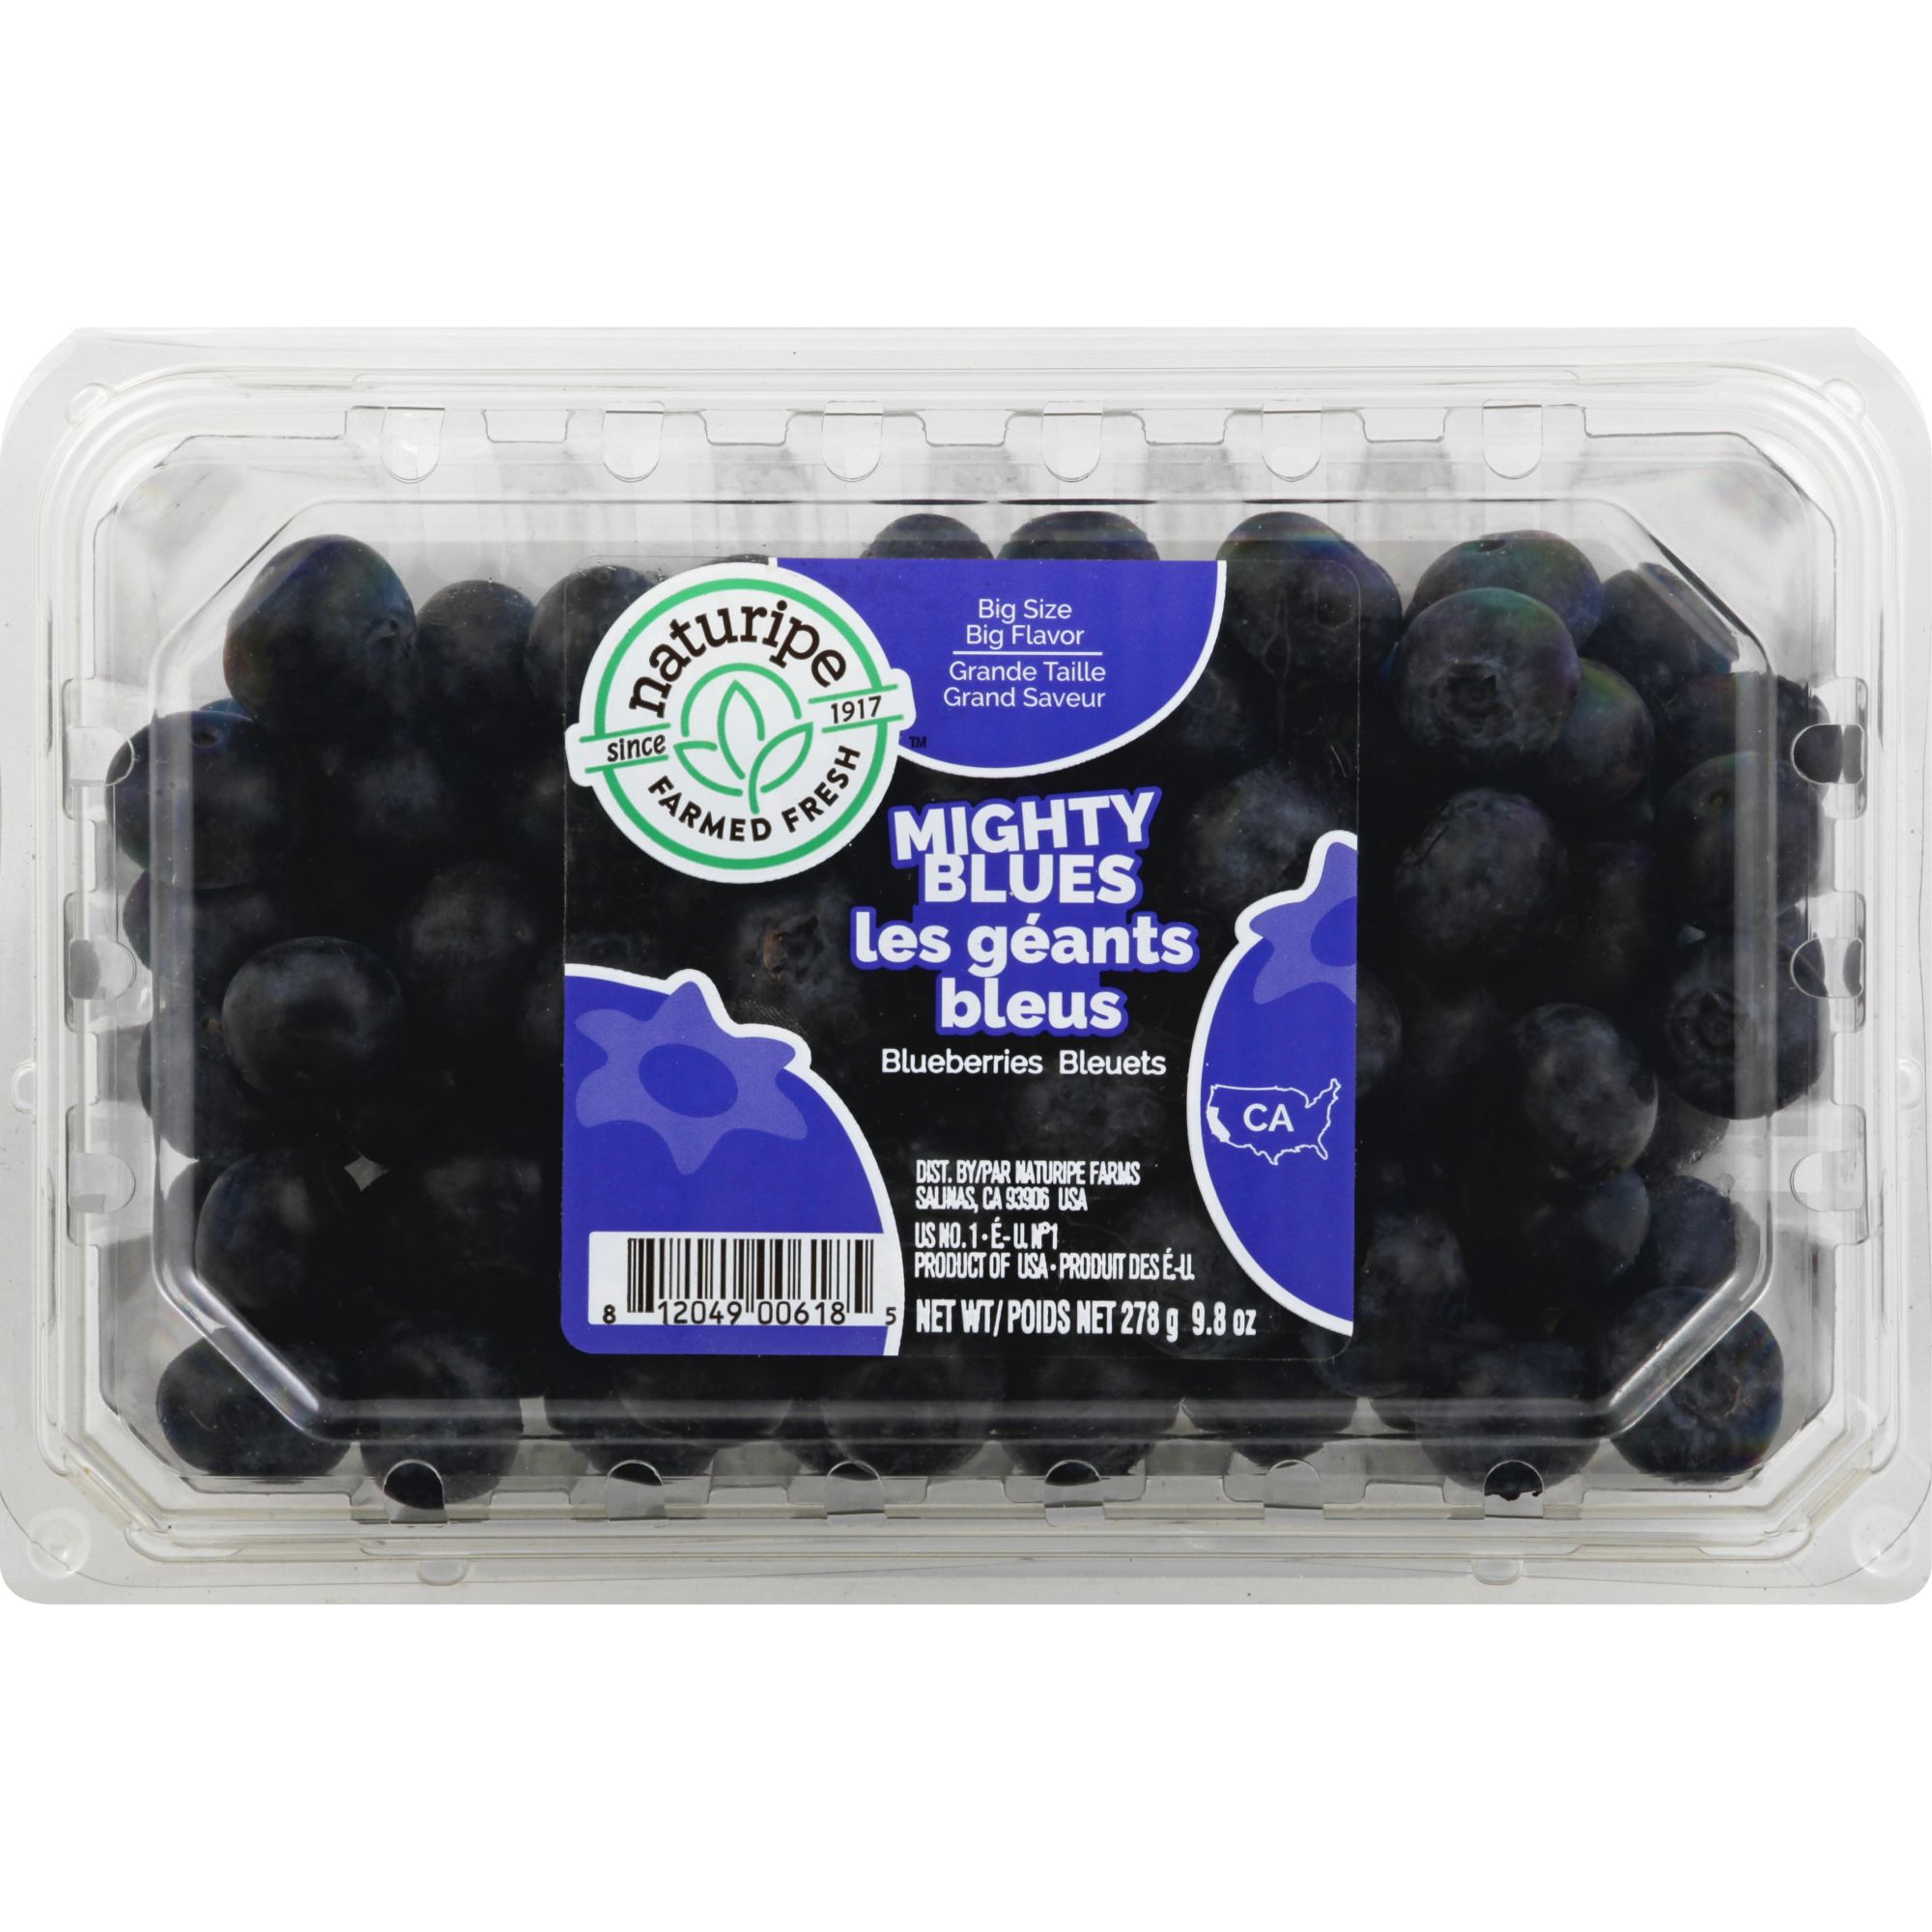 Only the best, sweetest and hardest jumbo blueberries